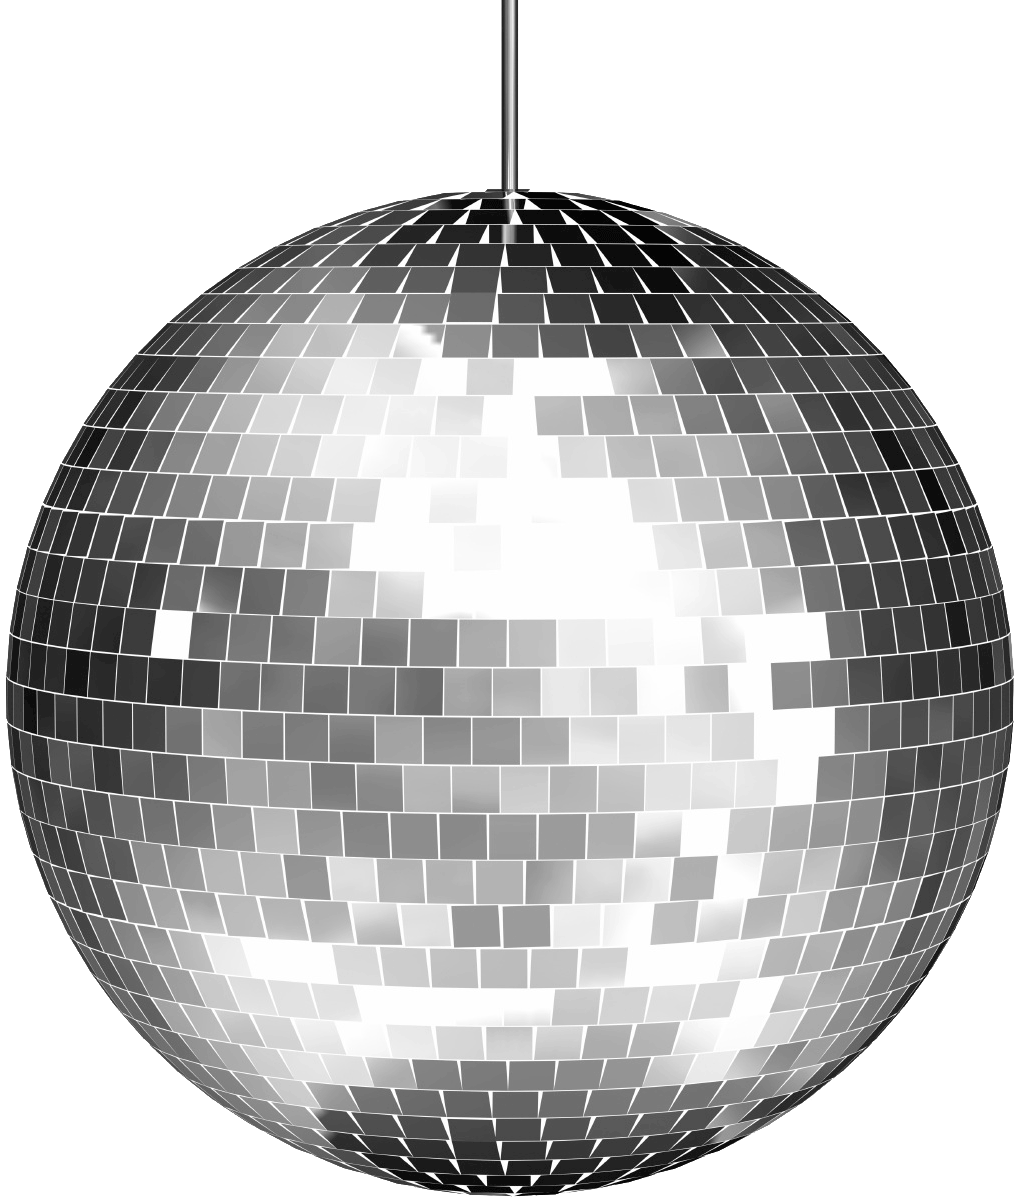 discoball .